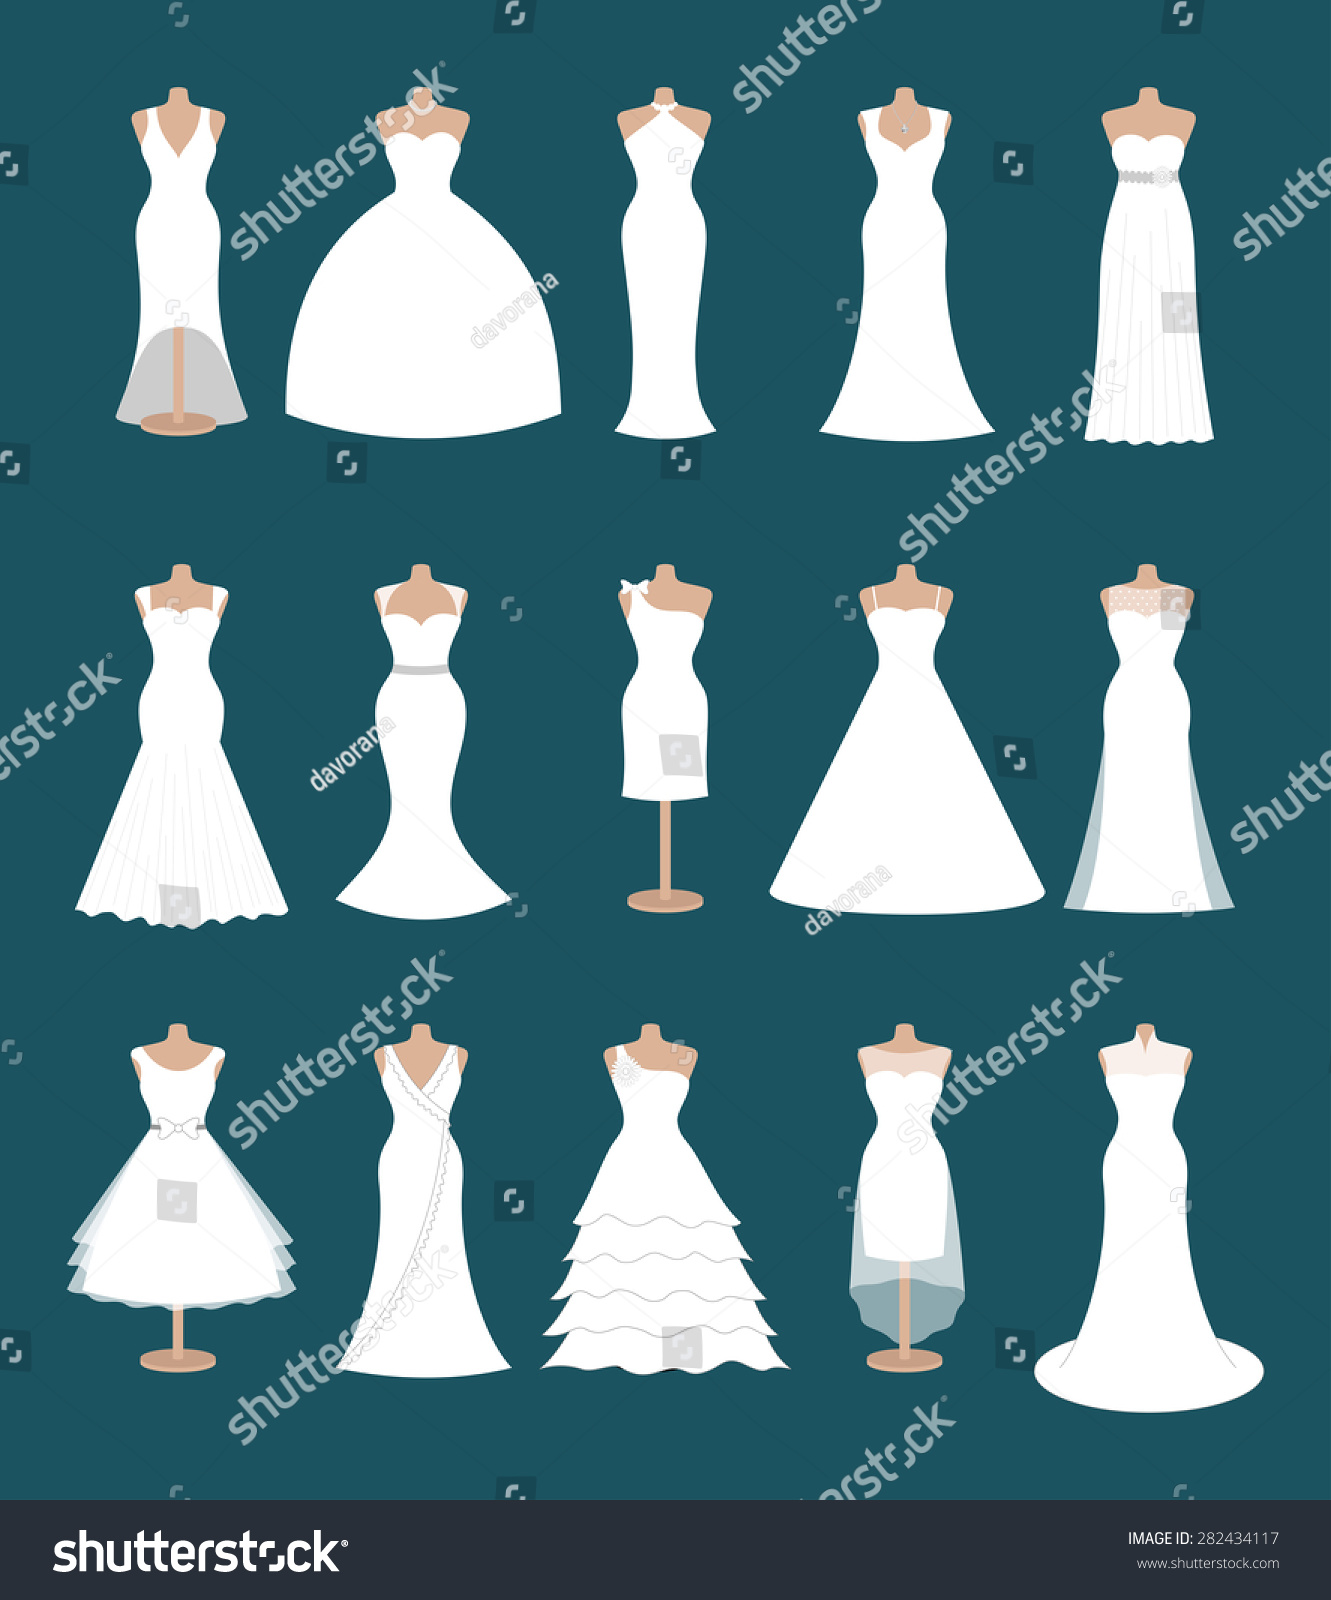 SVG of Set of different styles wedding dresses. Fashion bride dress, modern style design. Collection of white dress silhouette. Bridal shower composition, vector art image illustration isolated on background svg